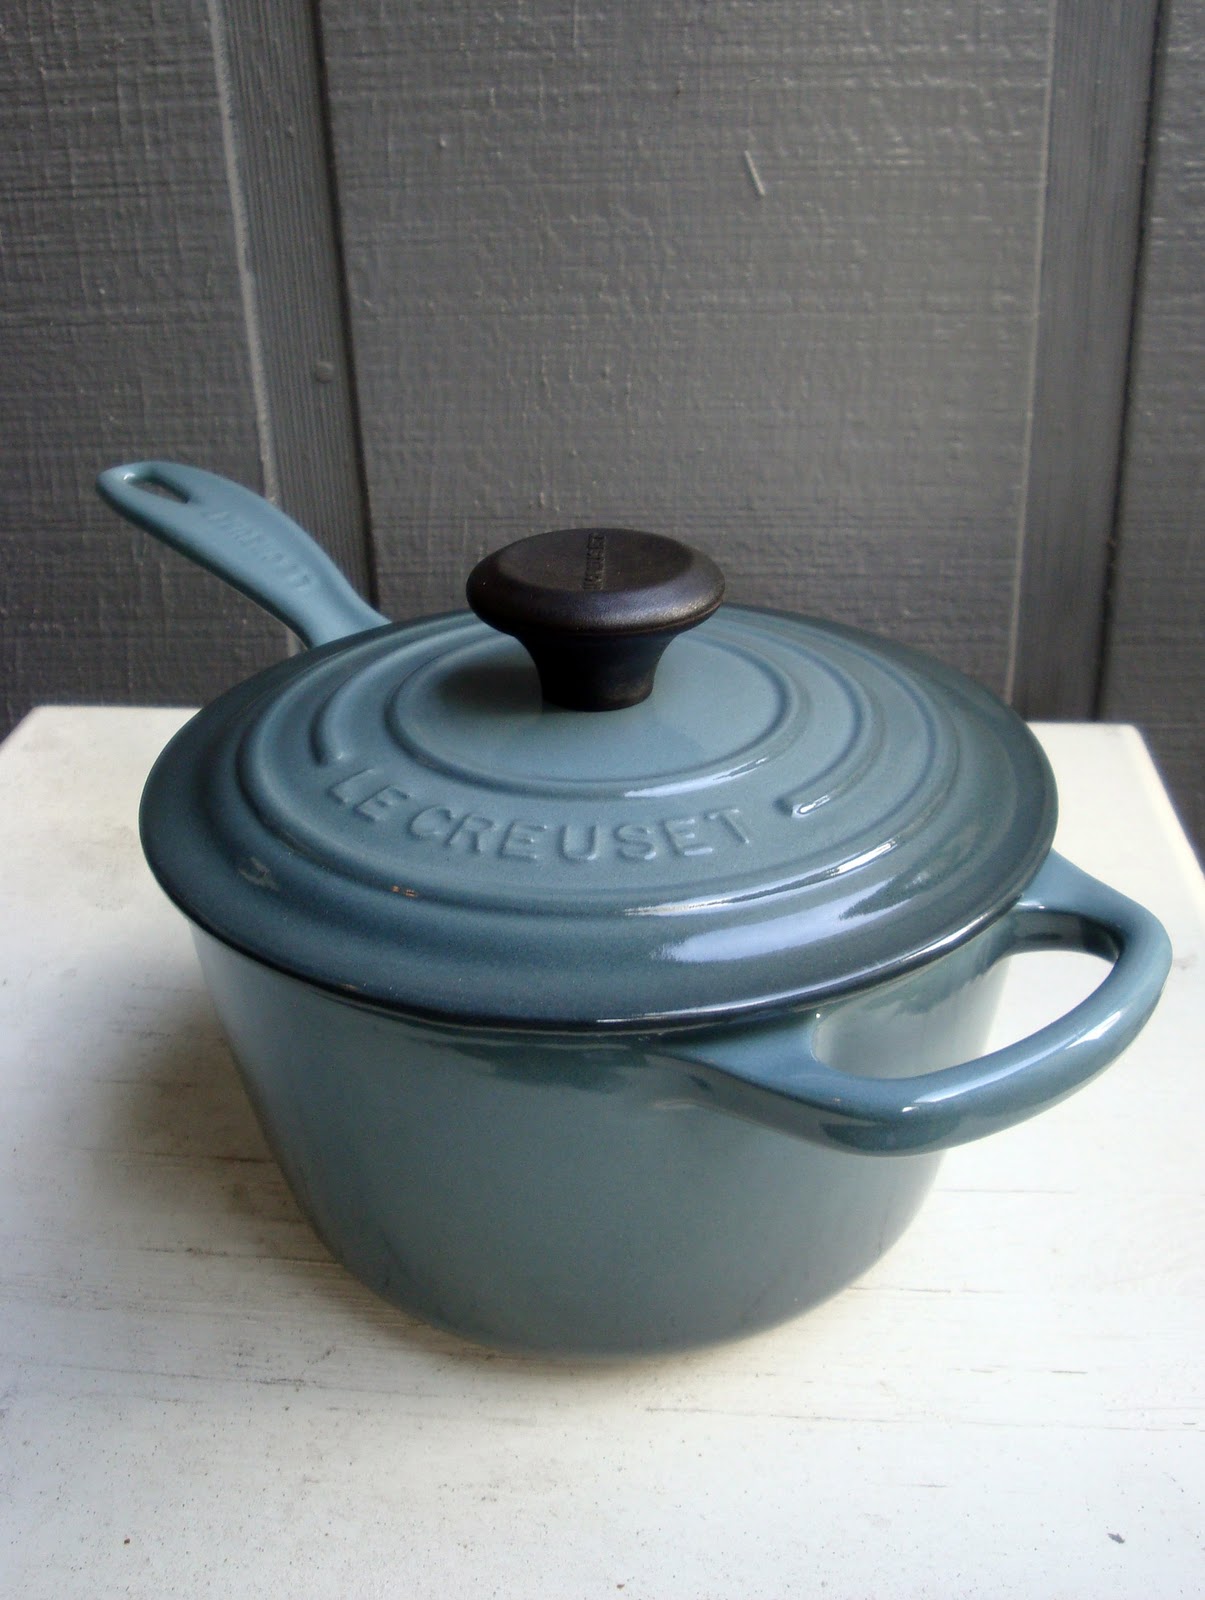 Kaitlyn Cooks: Le Creuset Signature Cookware - Thank you!!